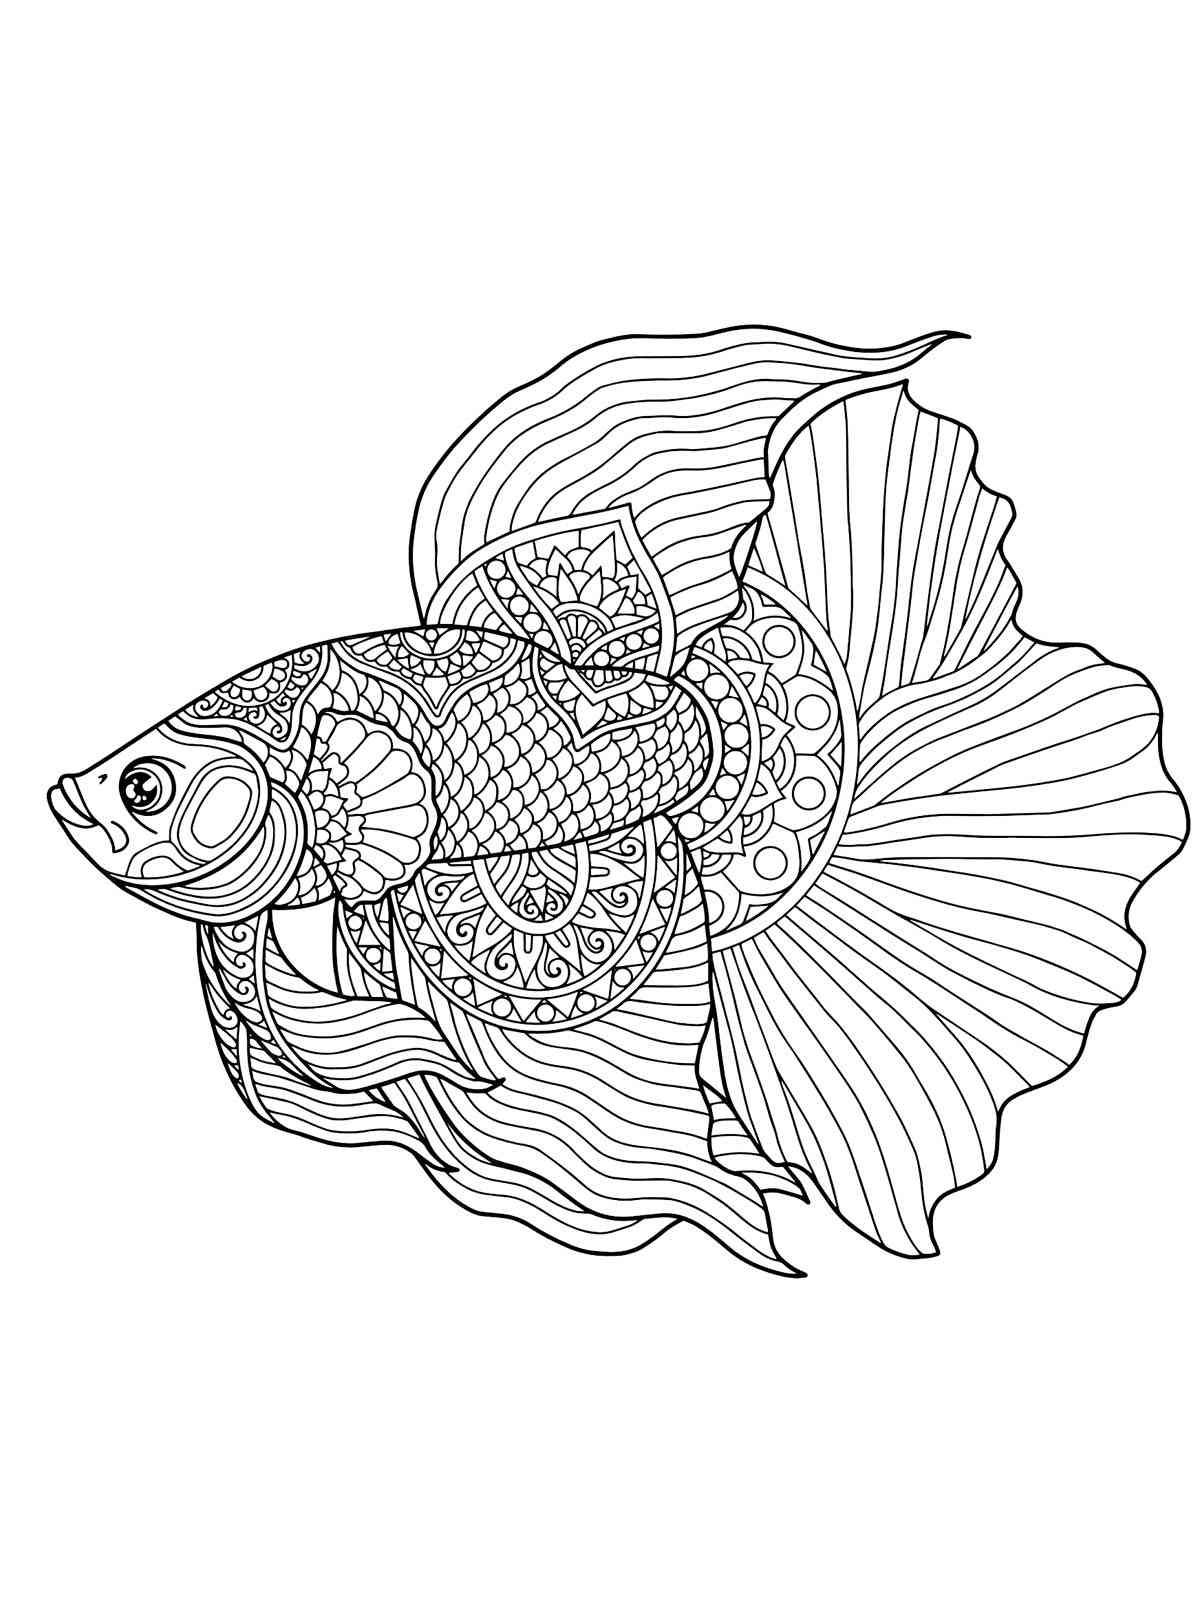 Betta Fish for Adult coloring page